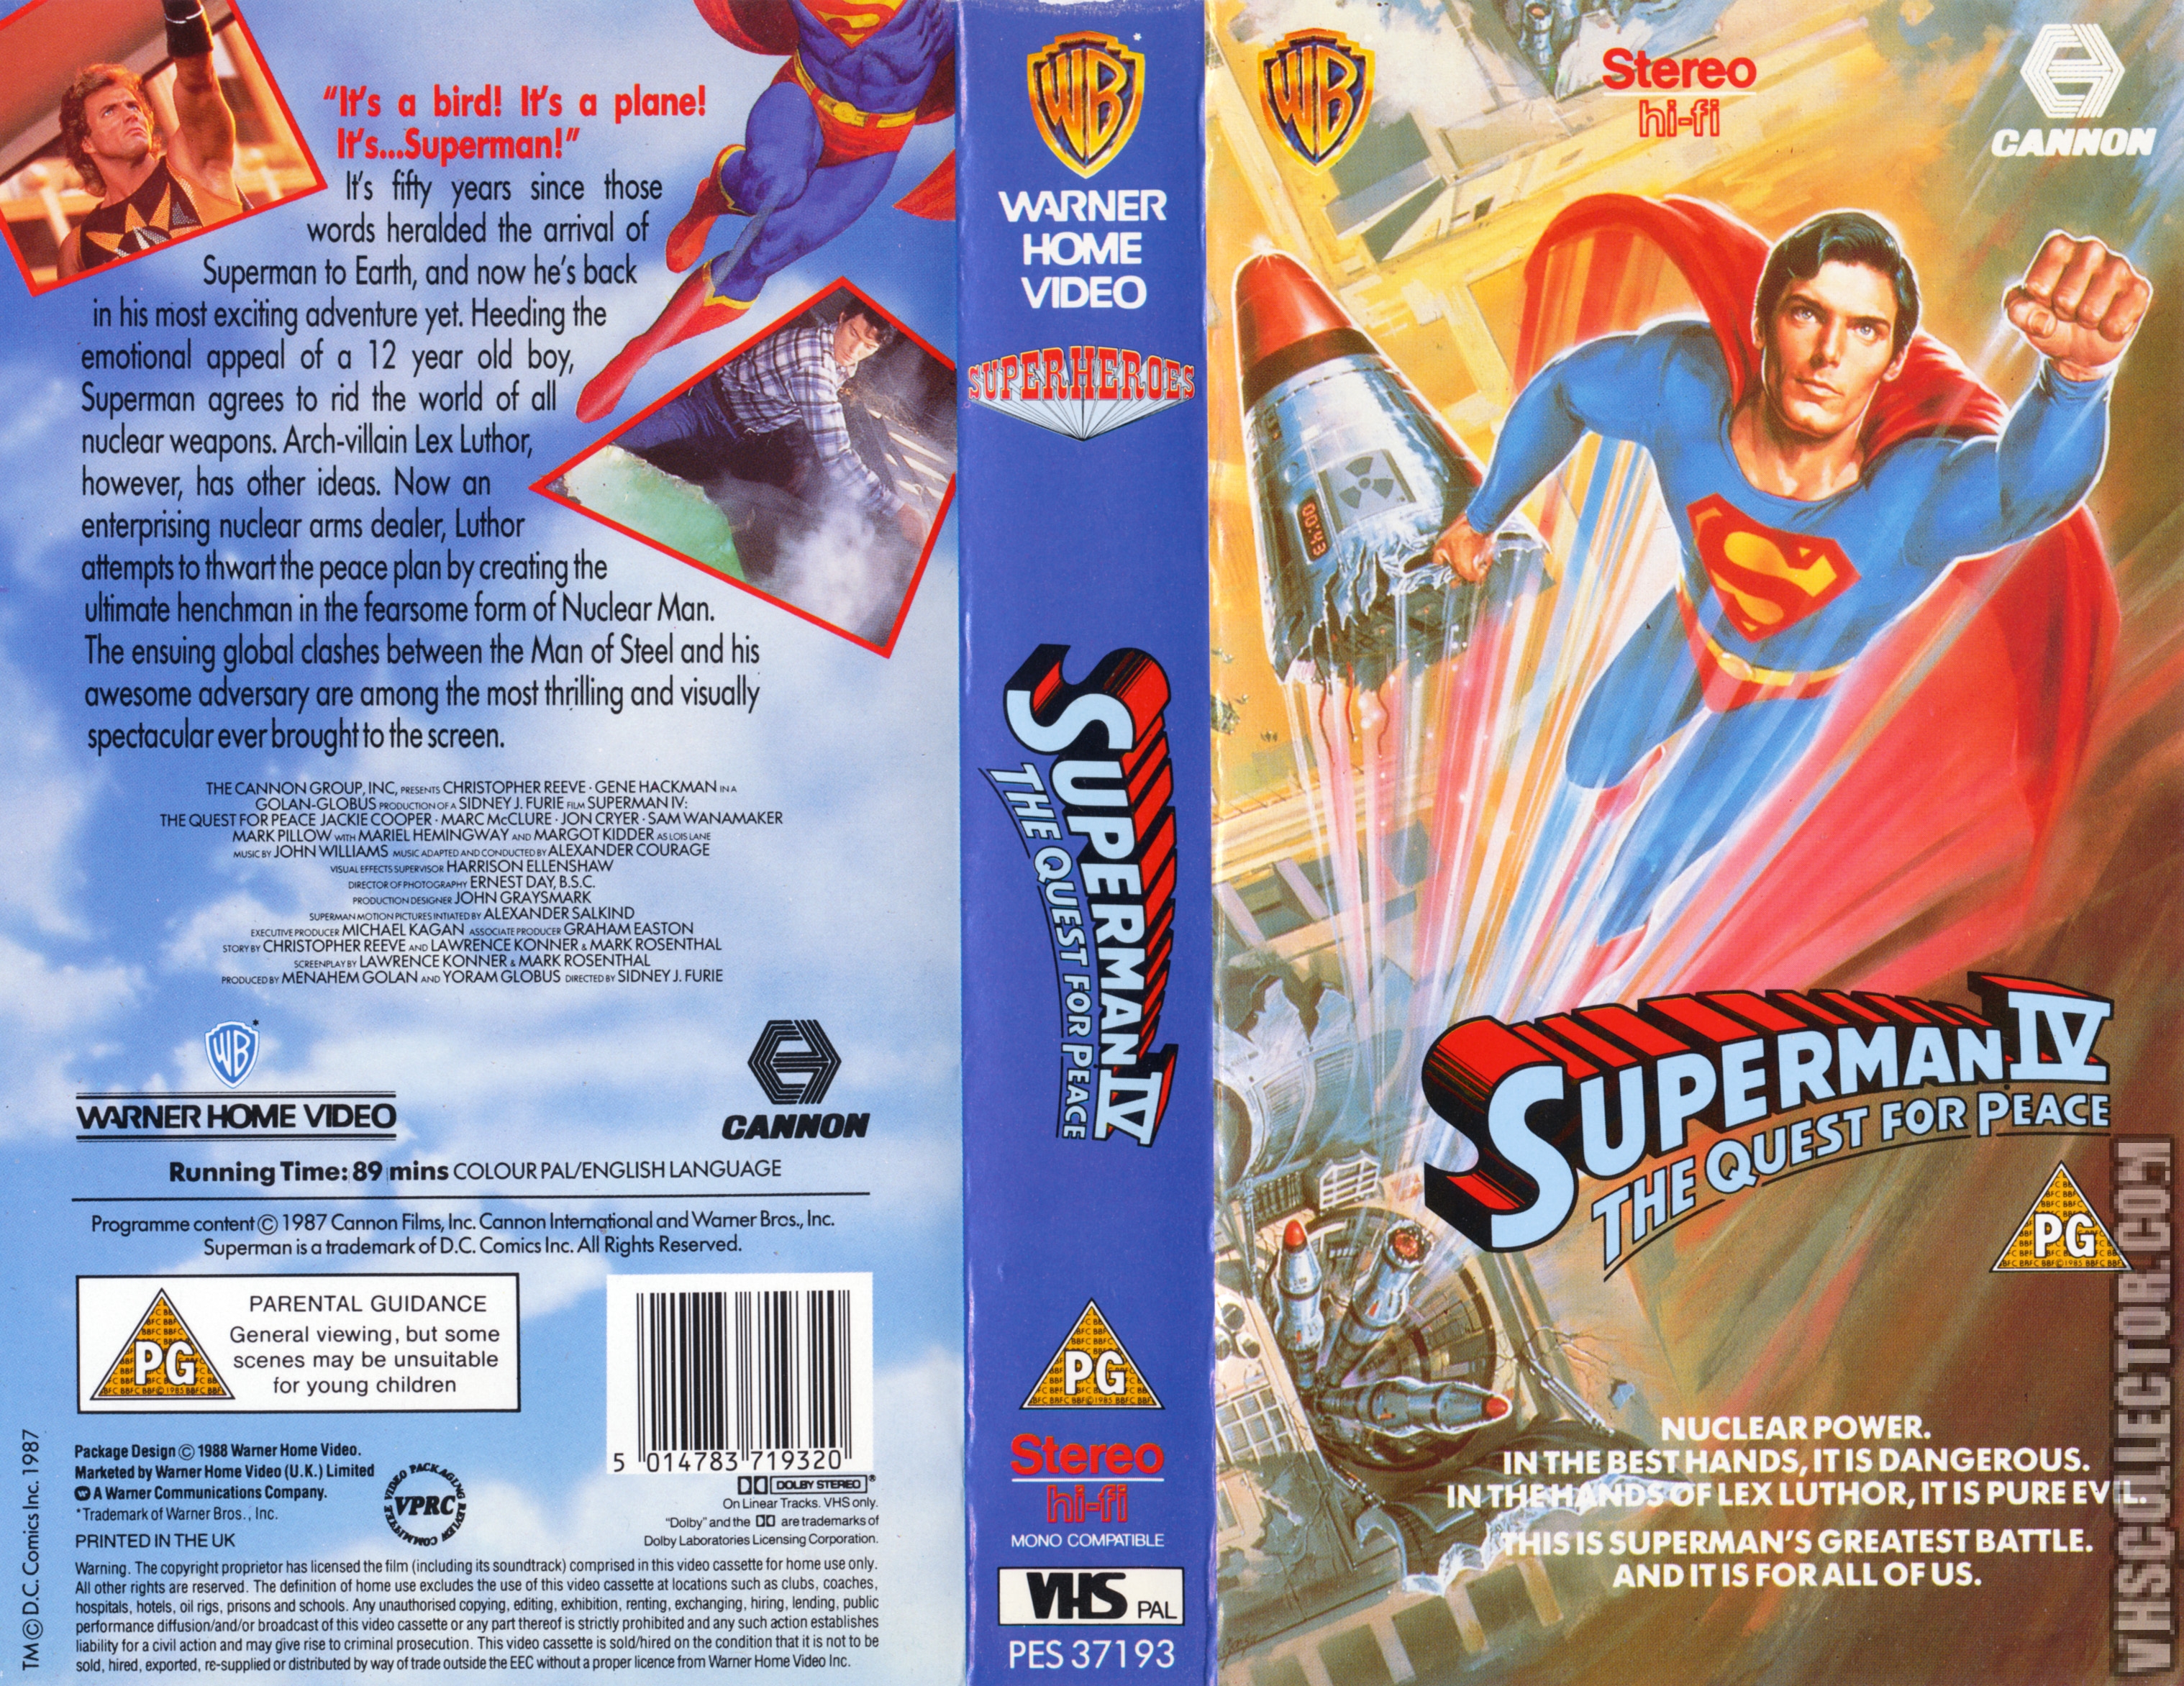 Superman IV: The Quest for Peace | VHSCollector.com